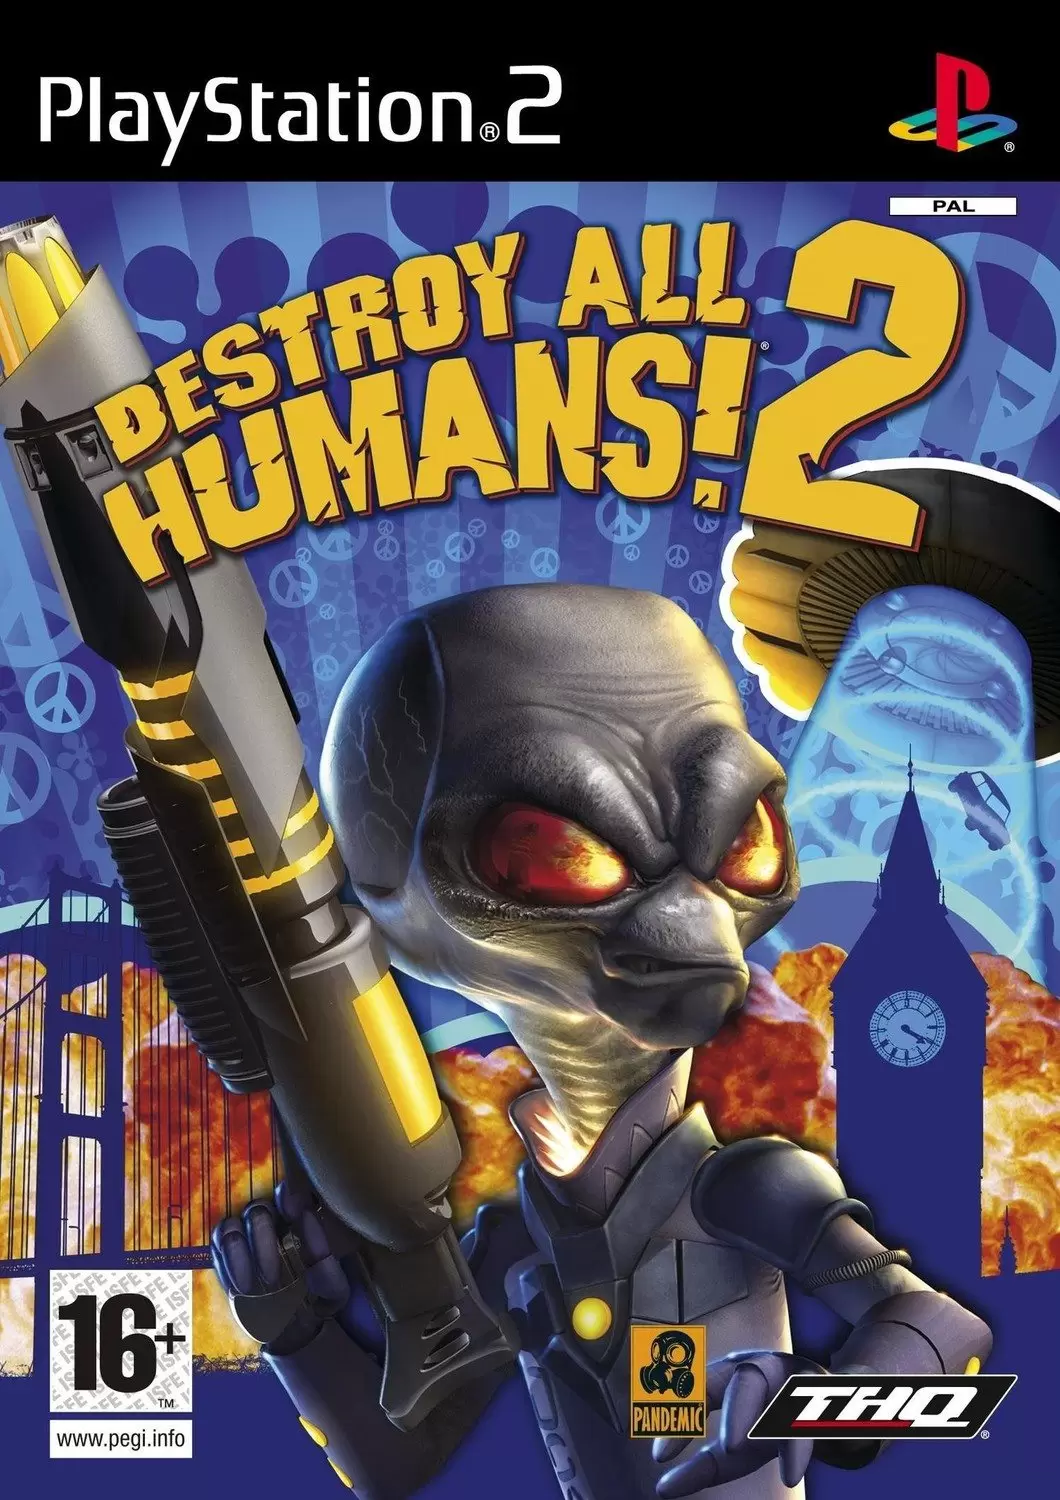 PS2 Games - Destroy All Humans! 2